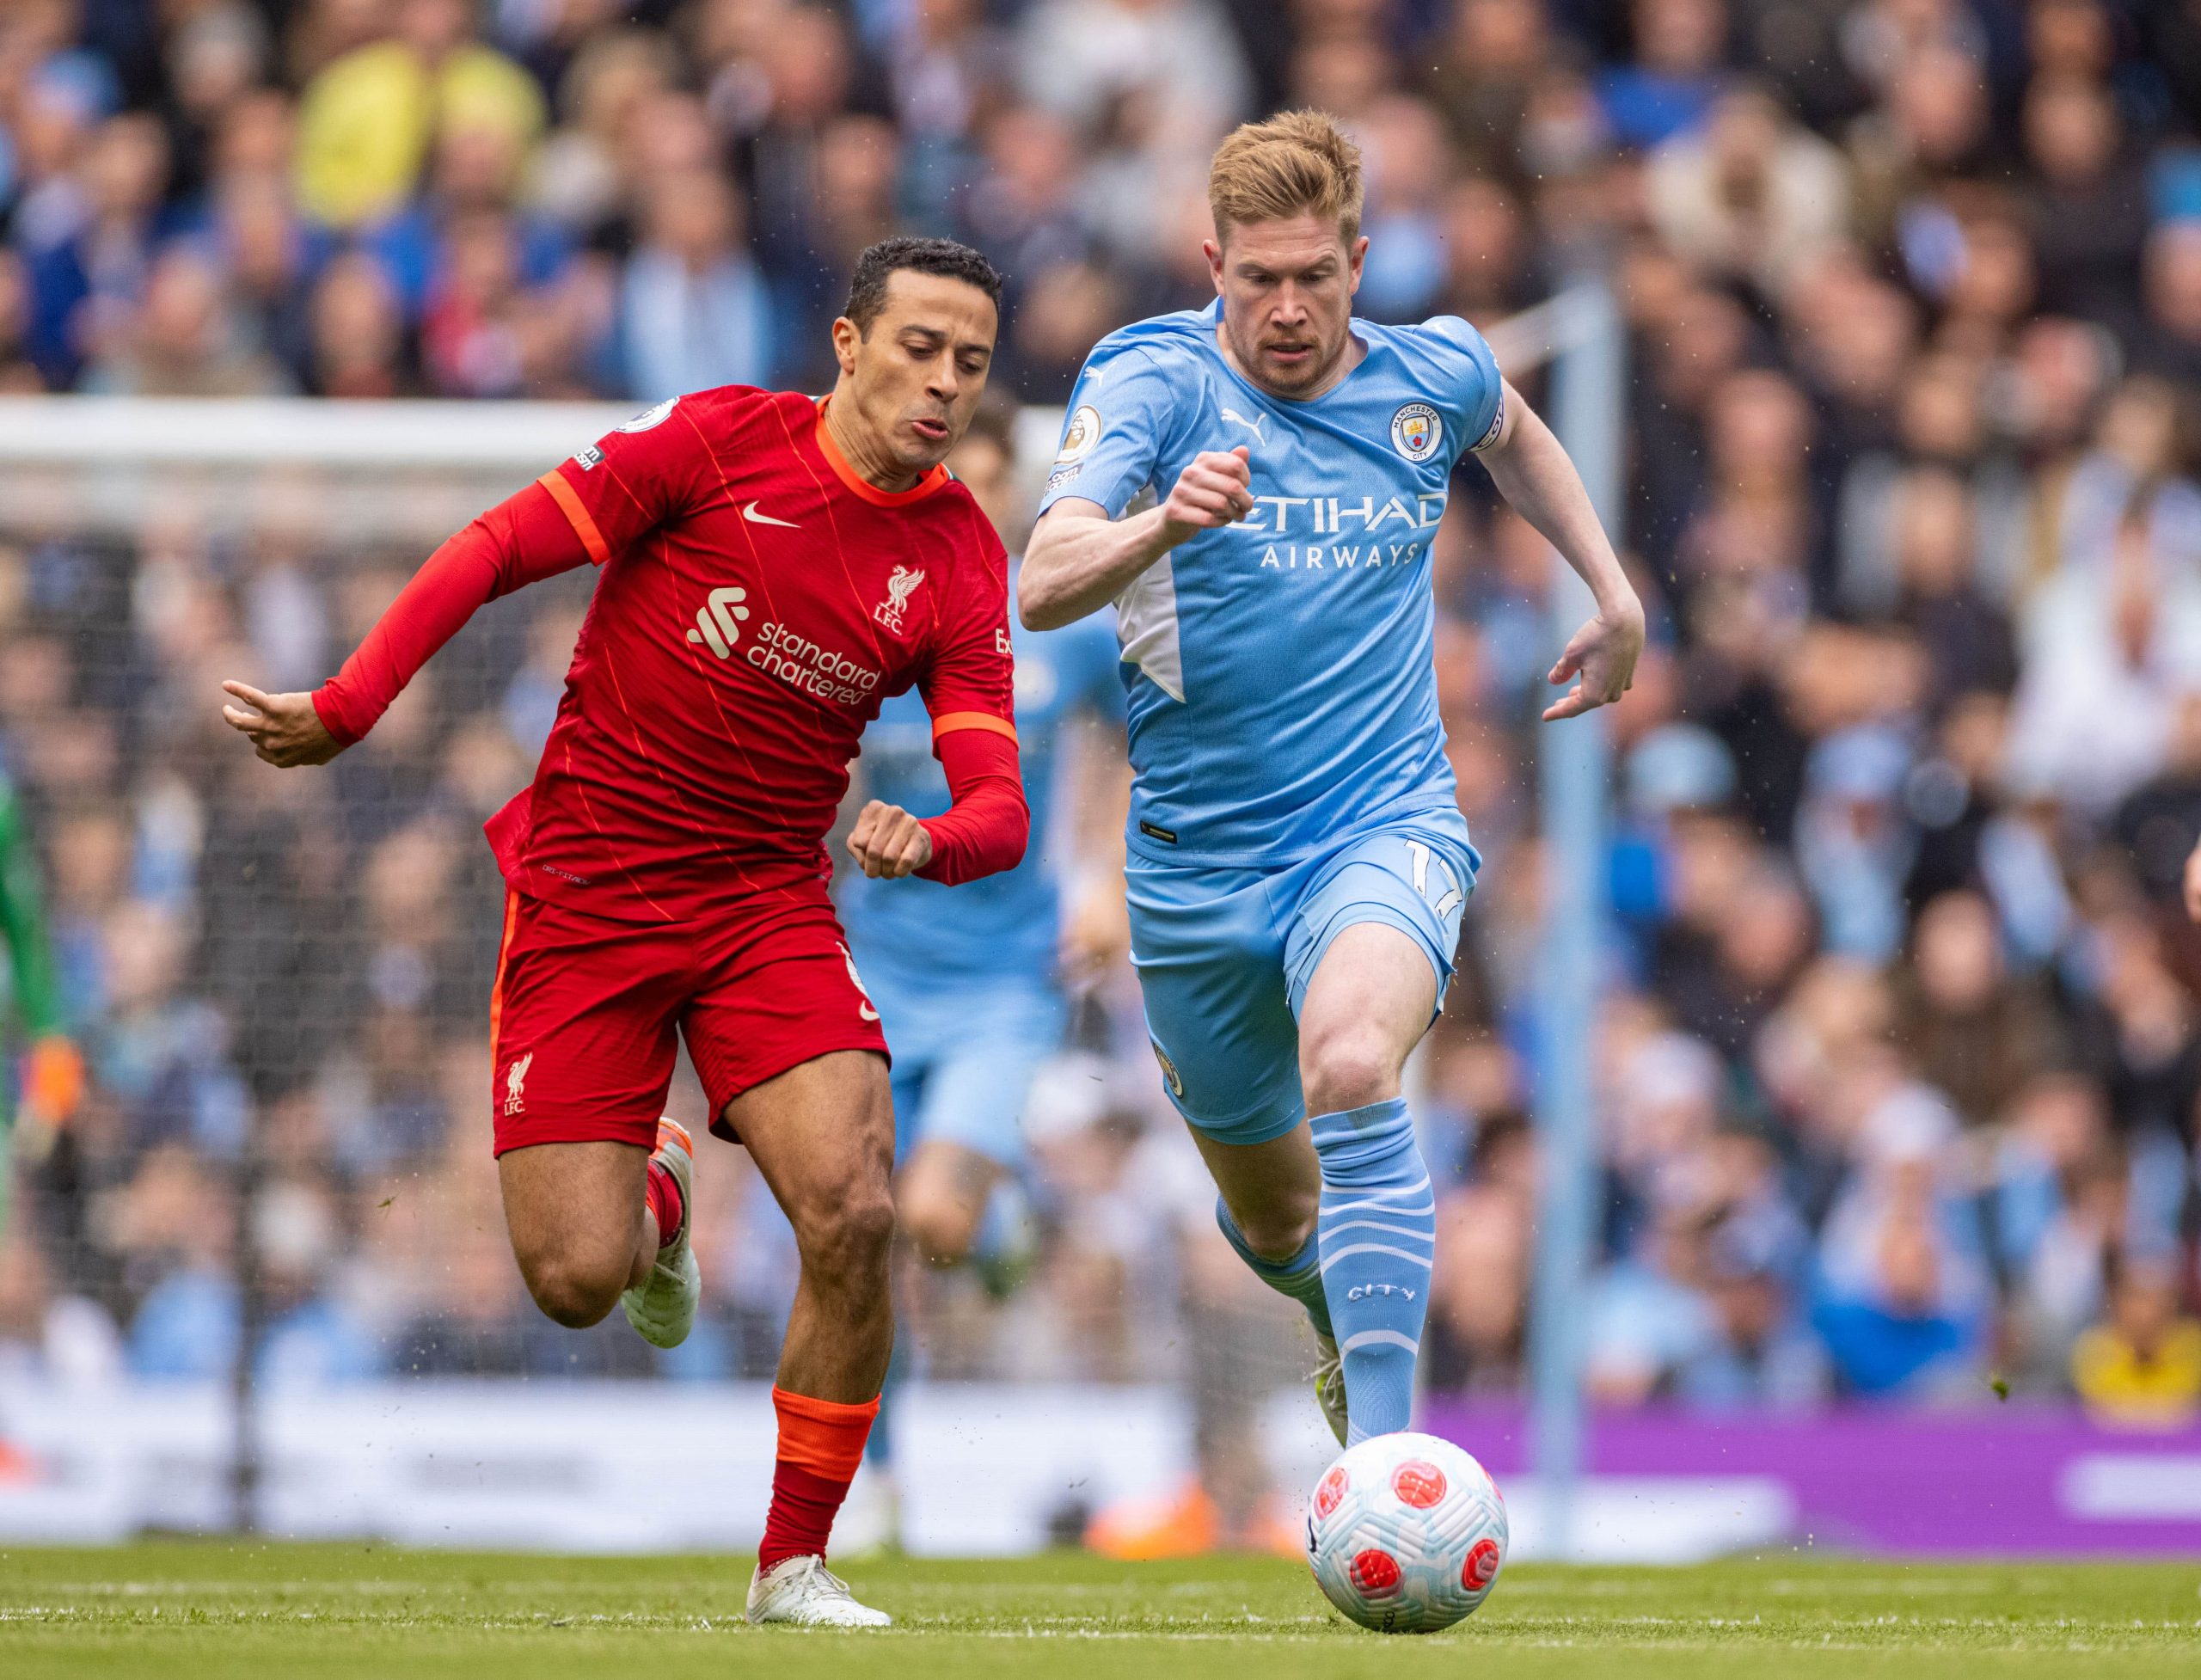 Manchester City's Kevin de Bruyne (R) gets away from Liverpool's Thiago Alcantara during the English Premier League match between Manchester City and Liverpool in Manchester, Britain, on April 10, 2022. The game ended in a 2-2 draw.